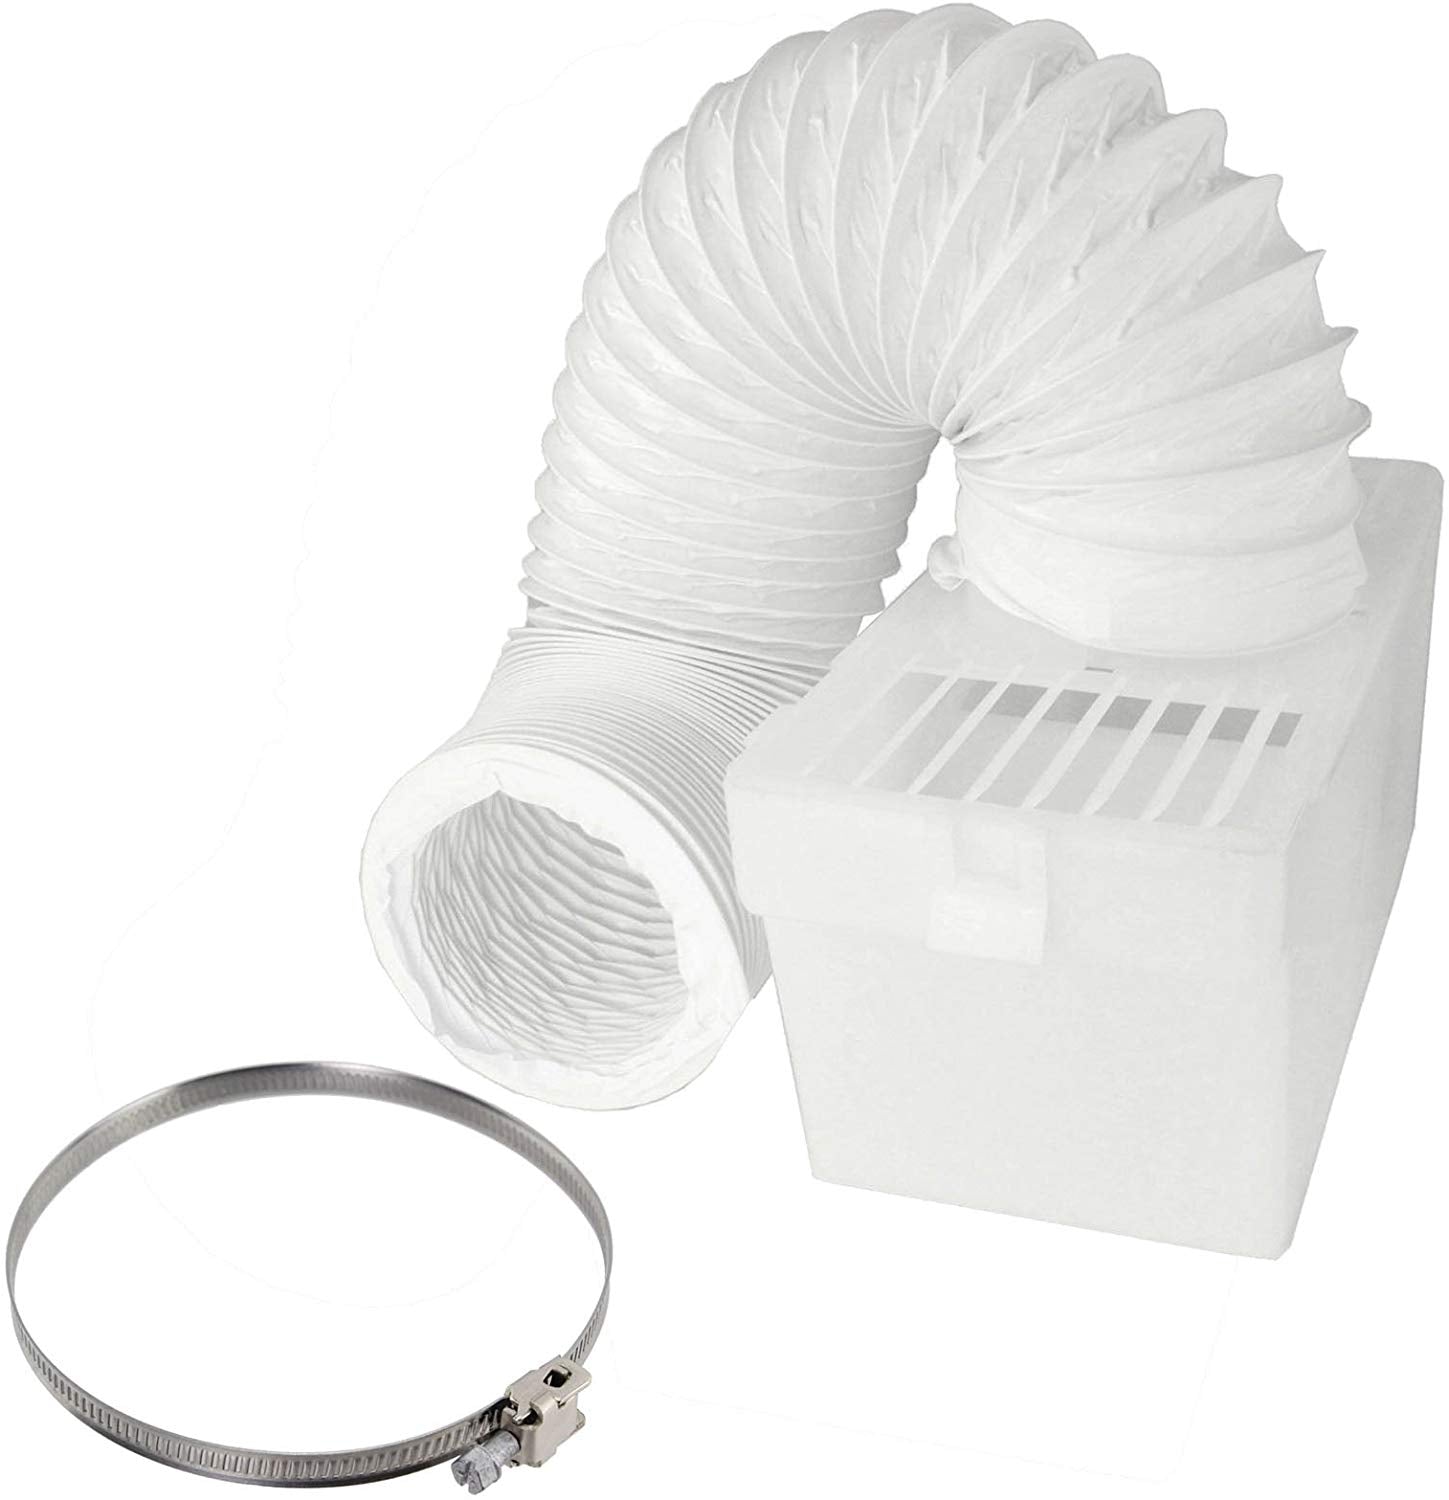 Condenser Vent Box & Hose Kit With Screw Clip for Bosch Vented Tumble Dryer (4" / 100mm Diameter)